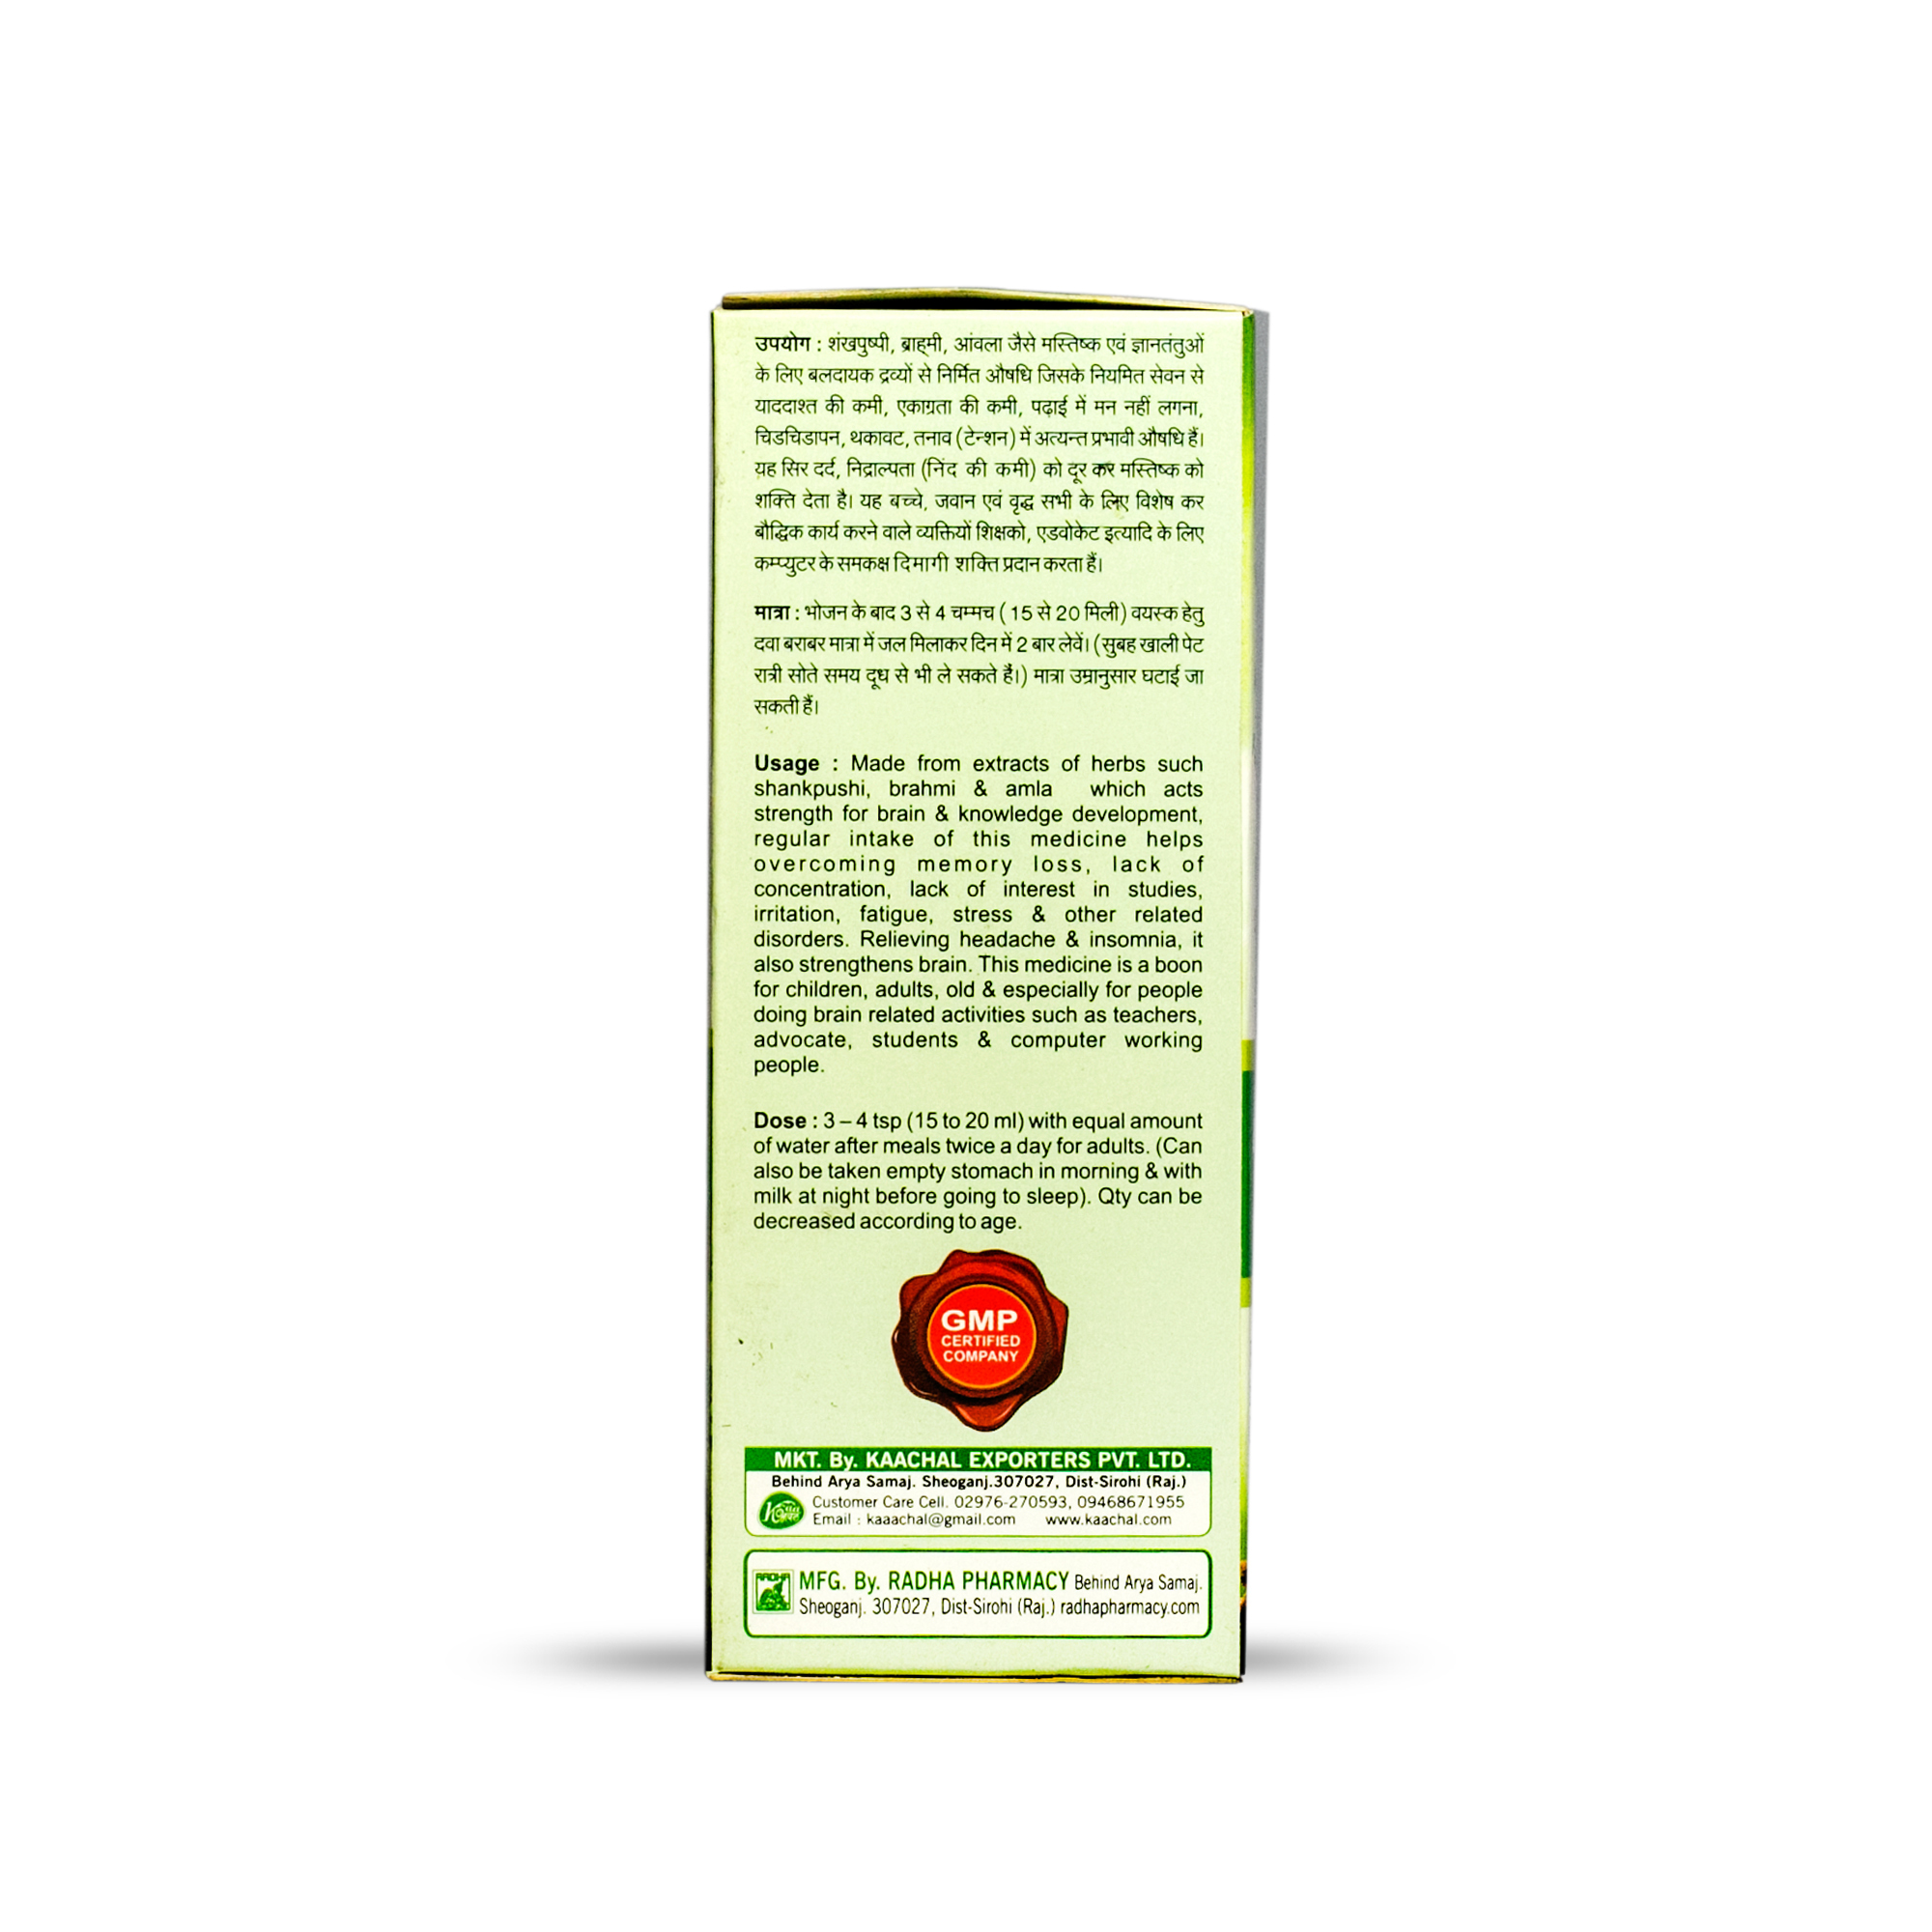 Achal Brainprover Syrup